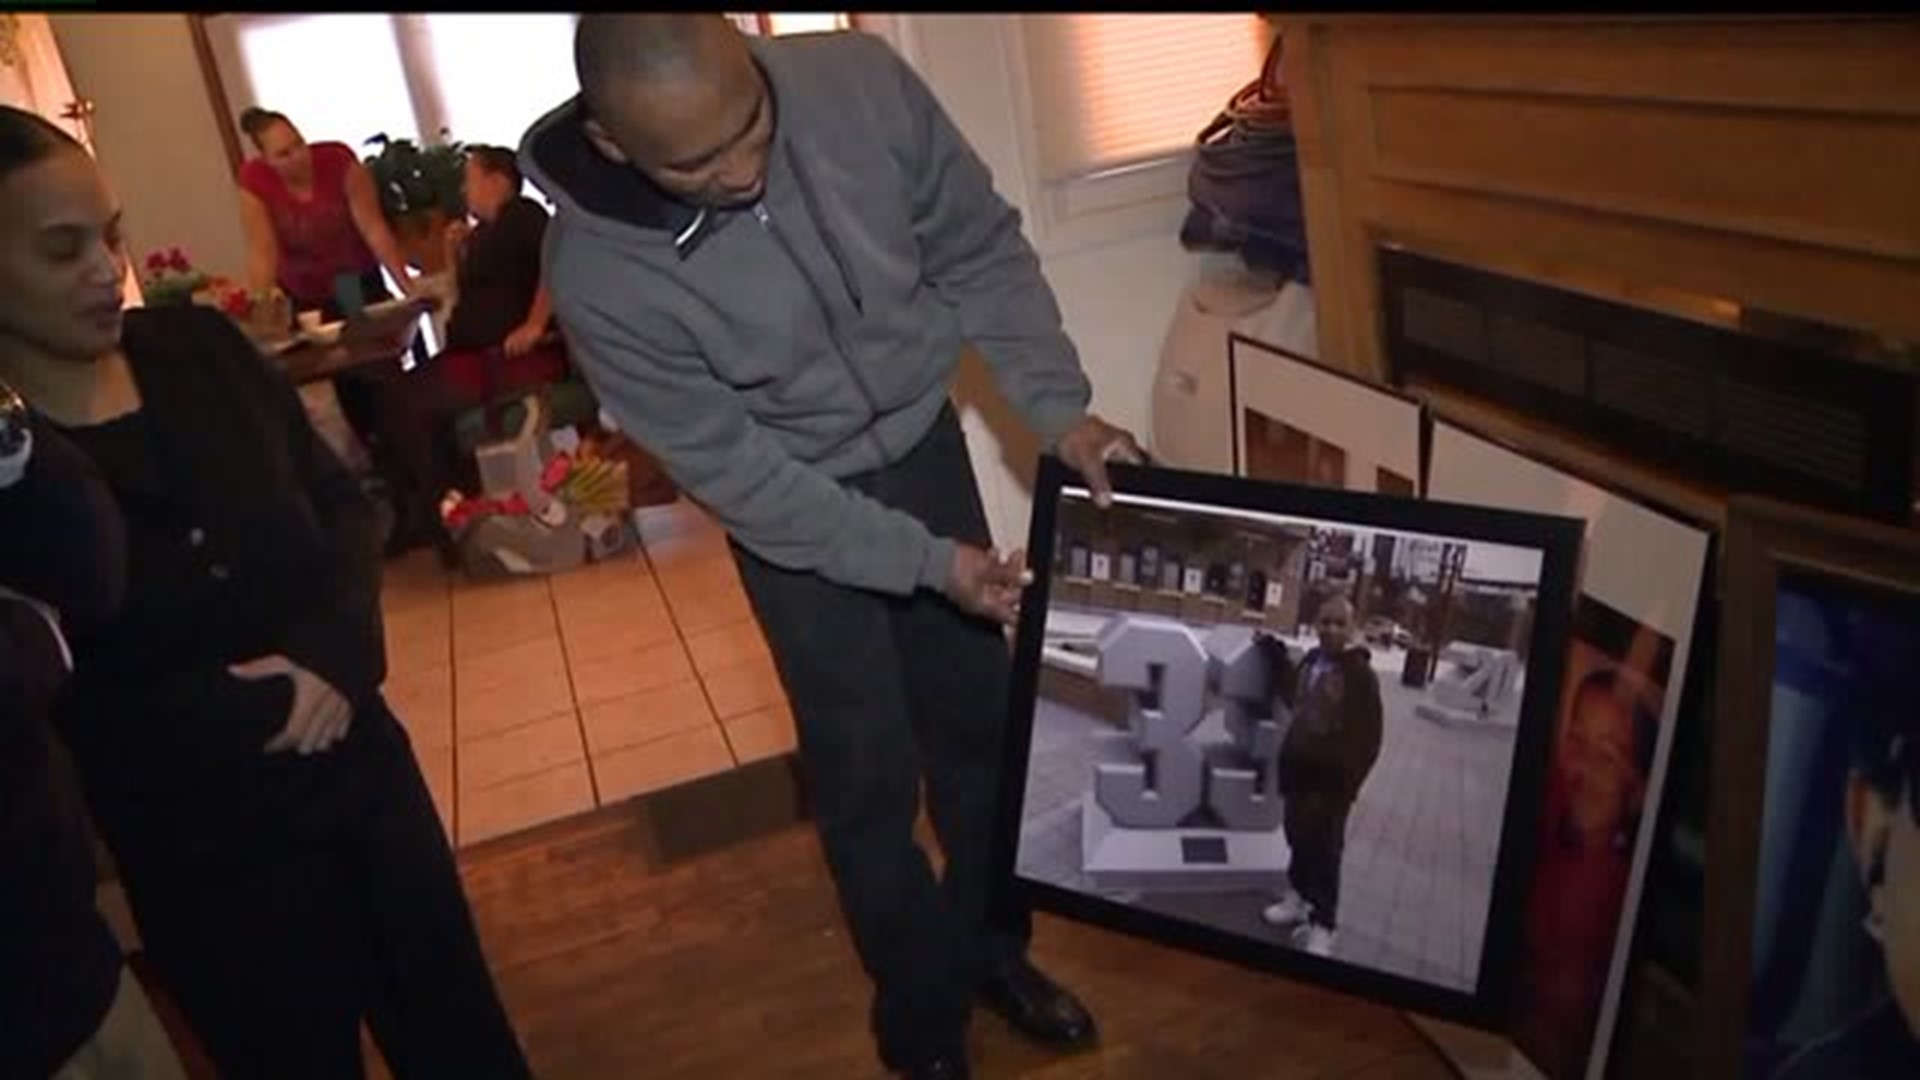 HARRISBURG FAMILY OF FIRST HOMICIDE VICTIM SPEAKS OUT